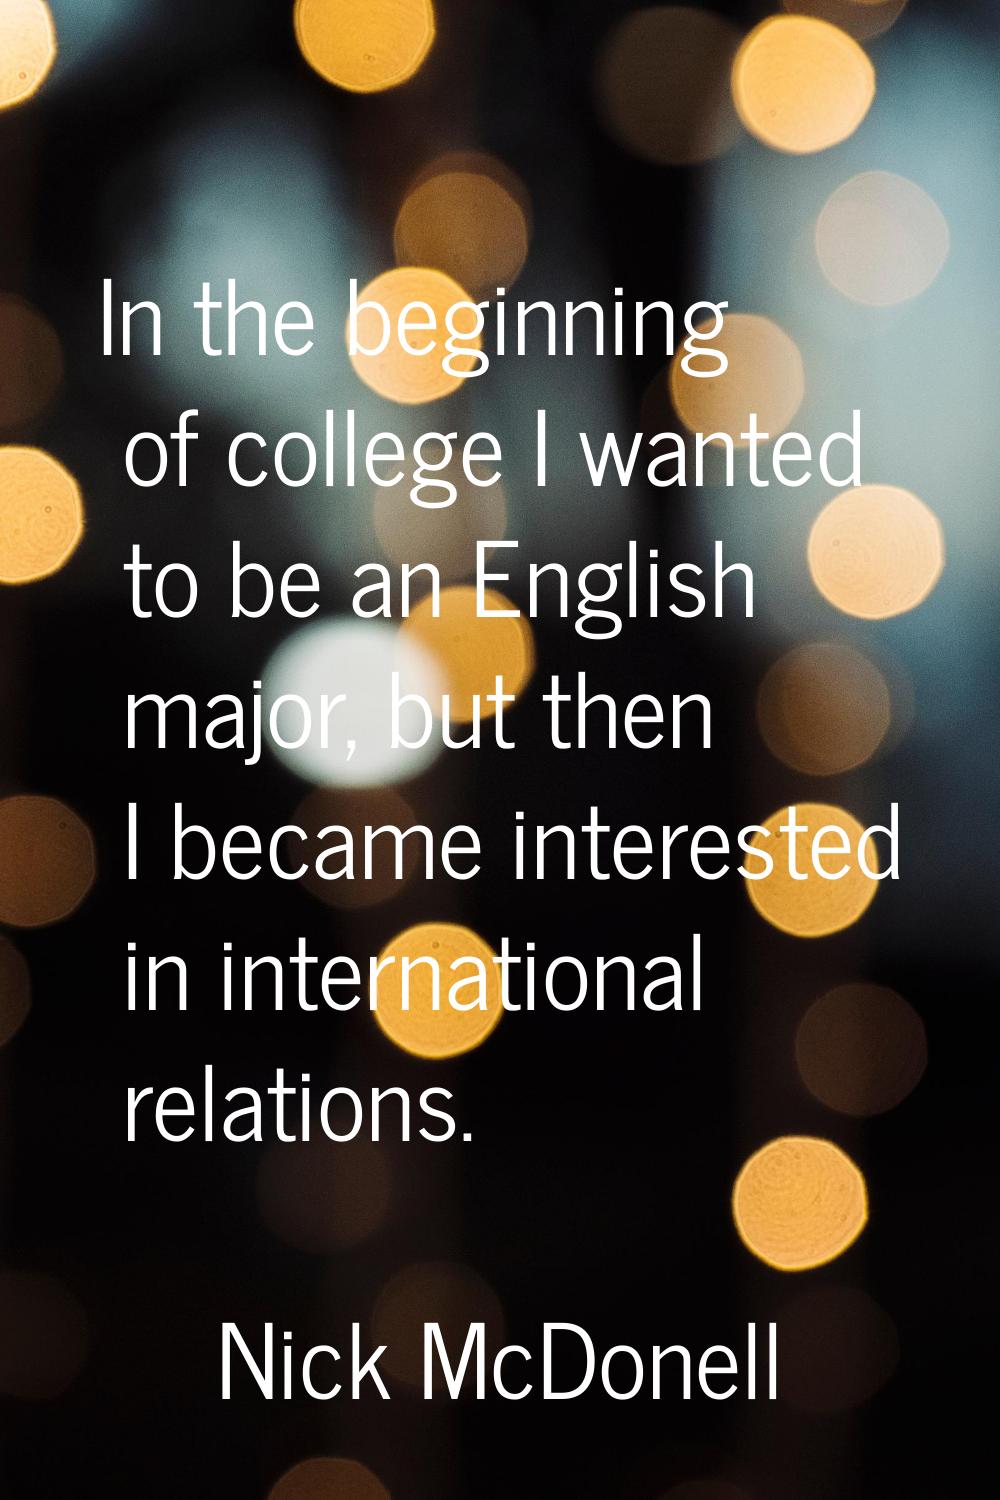 In the beginning of college I wanted to be an English major, but then I became interested in intern